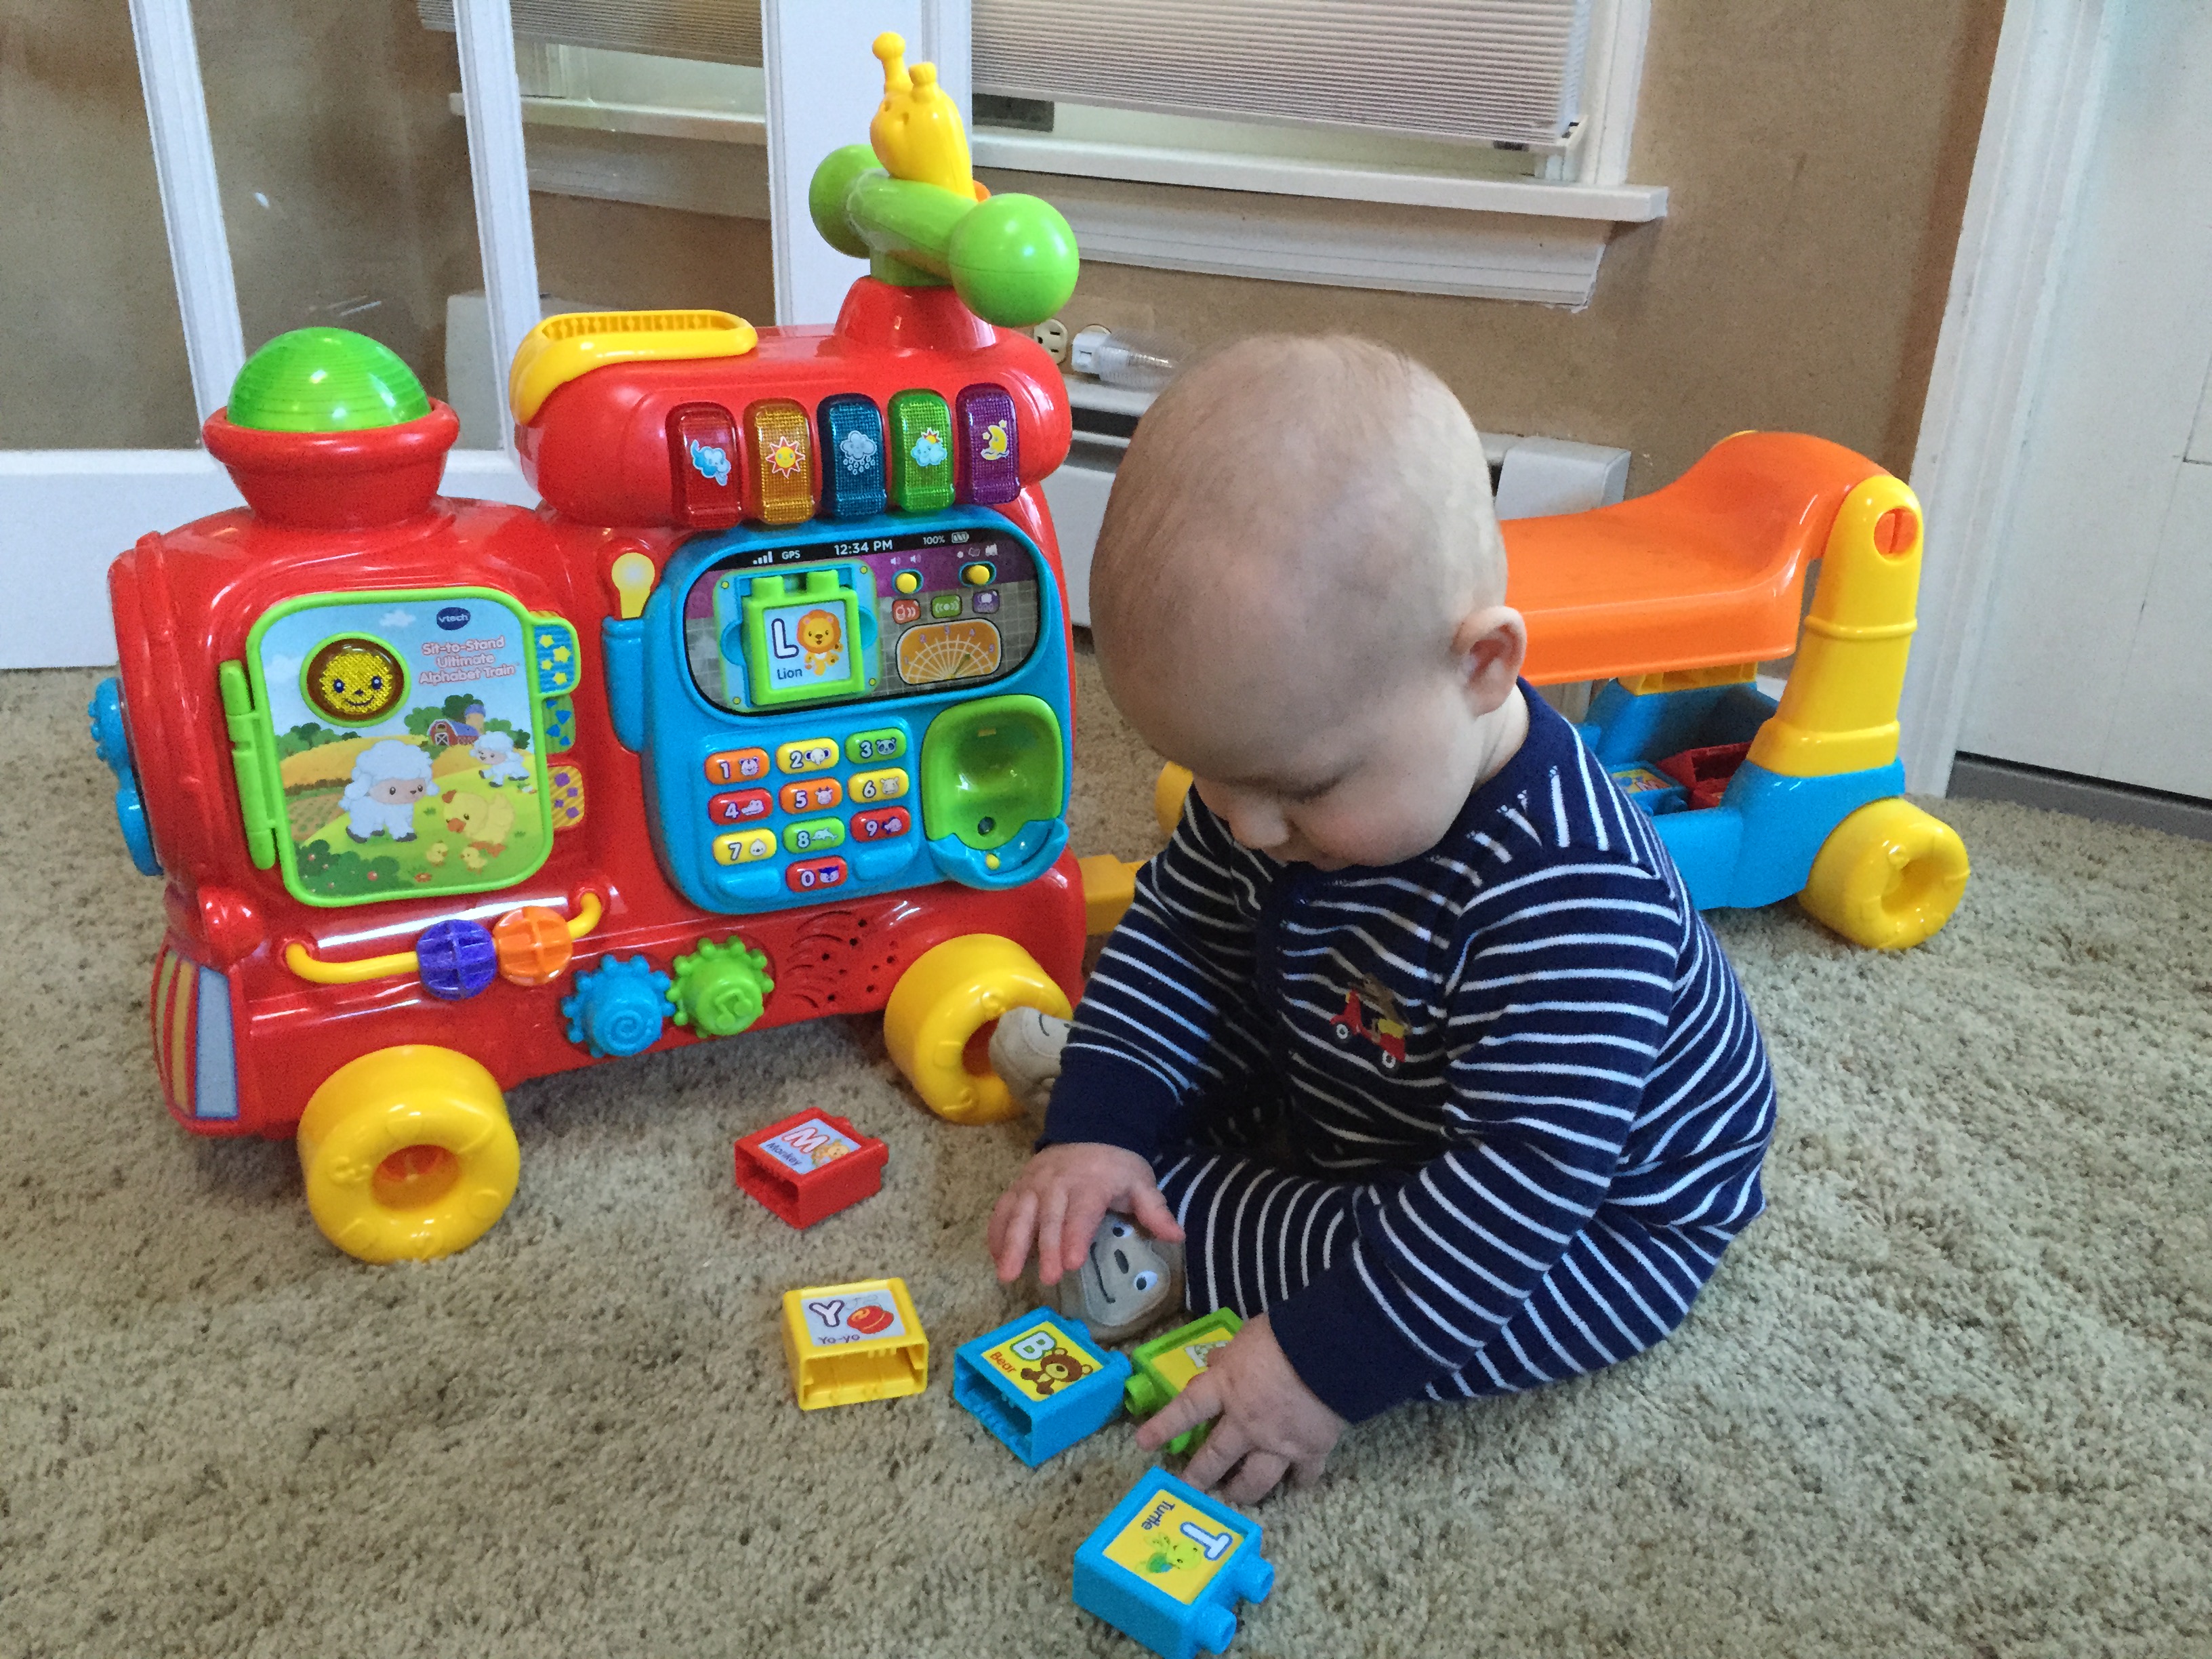 Vtech Ride on Train with working sounds and play blocks - baby